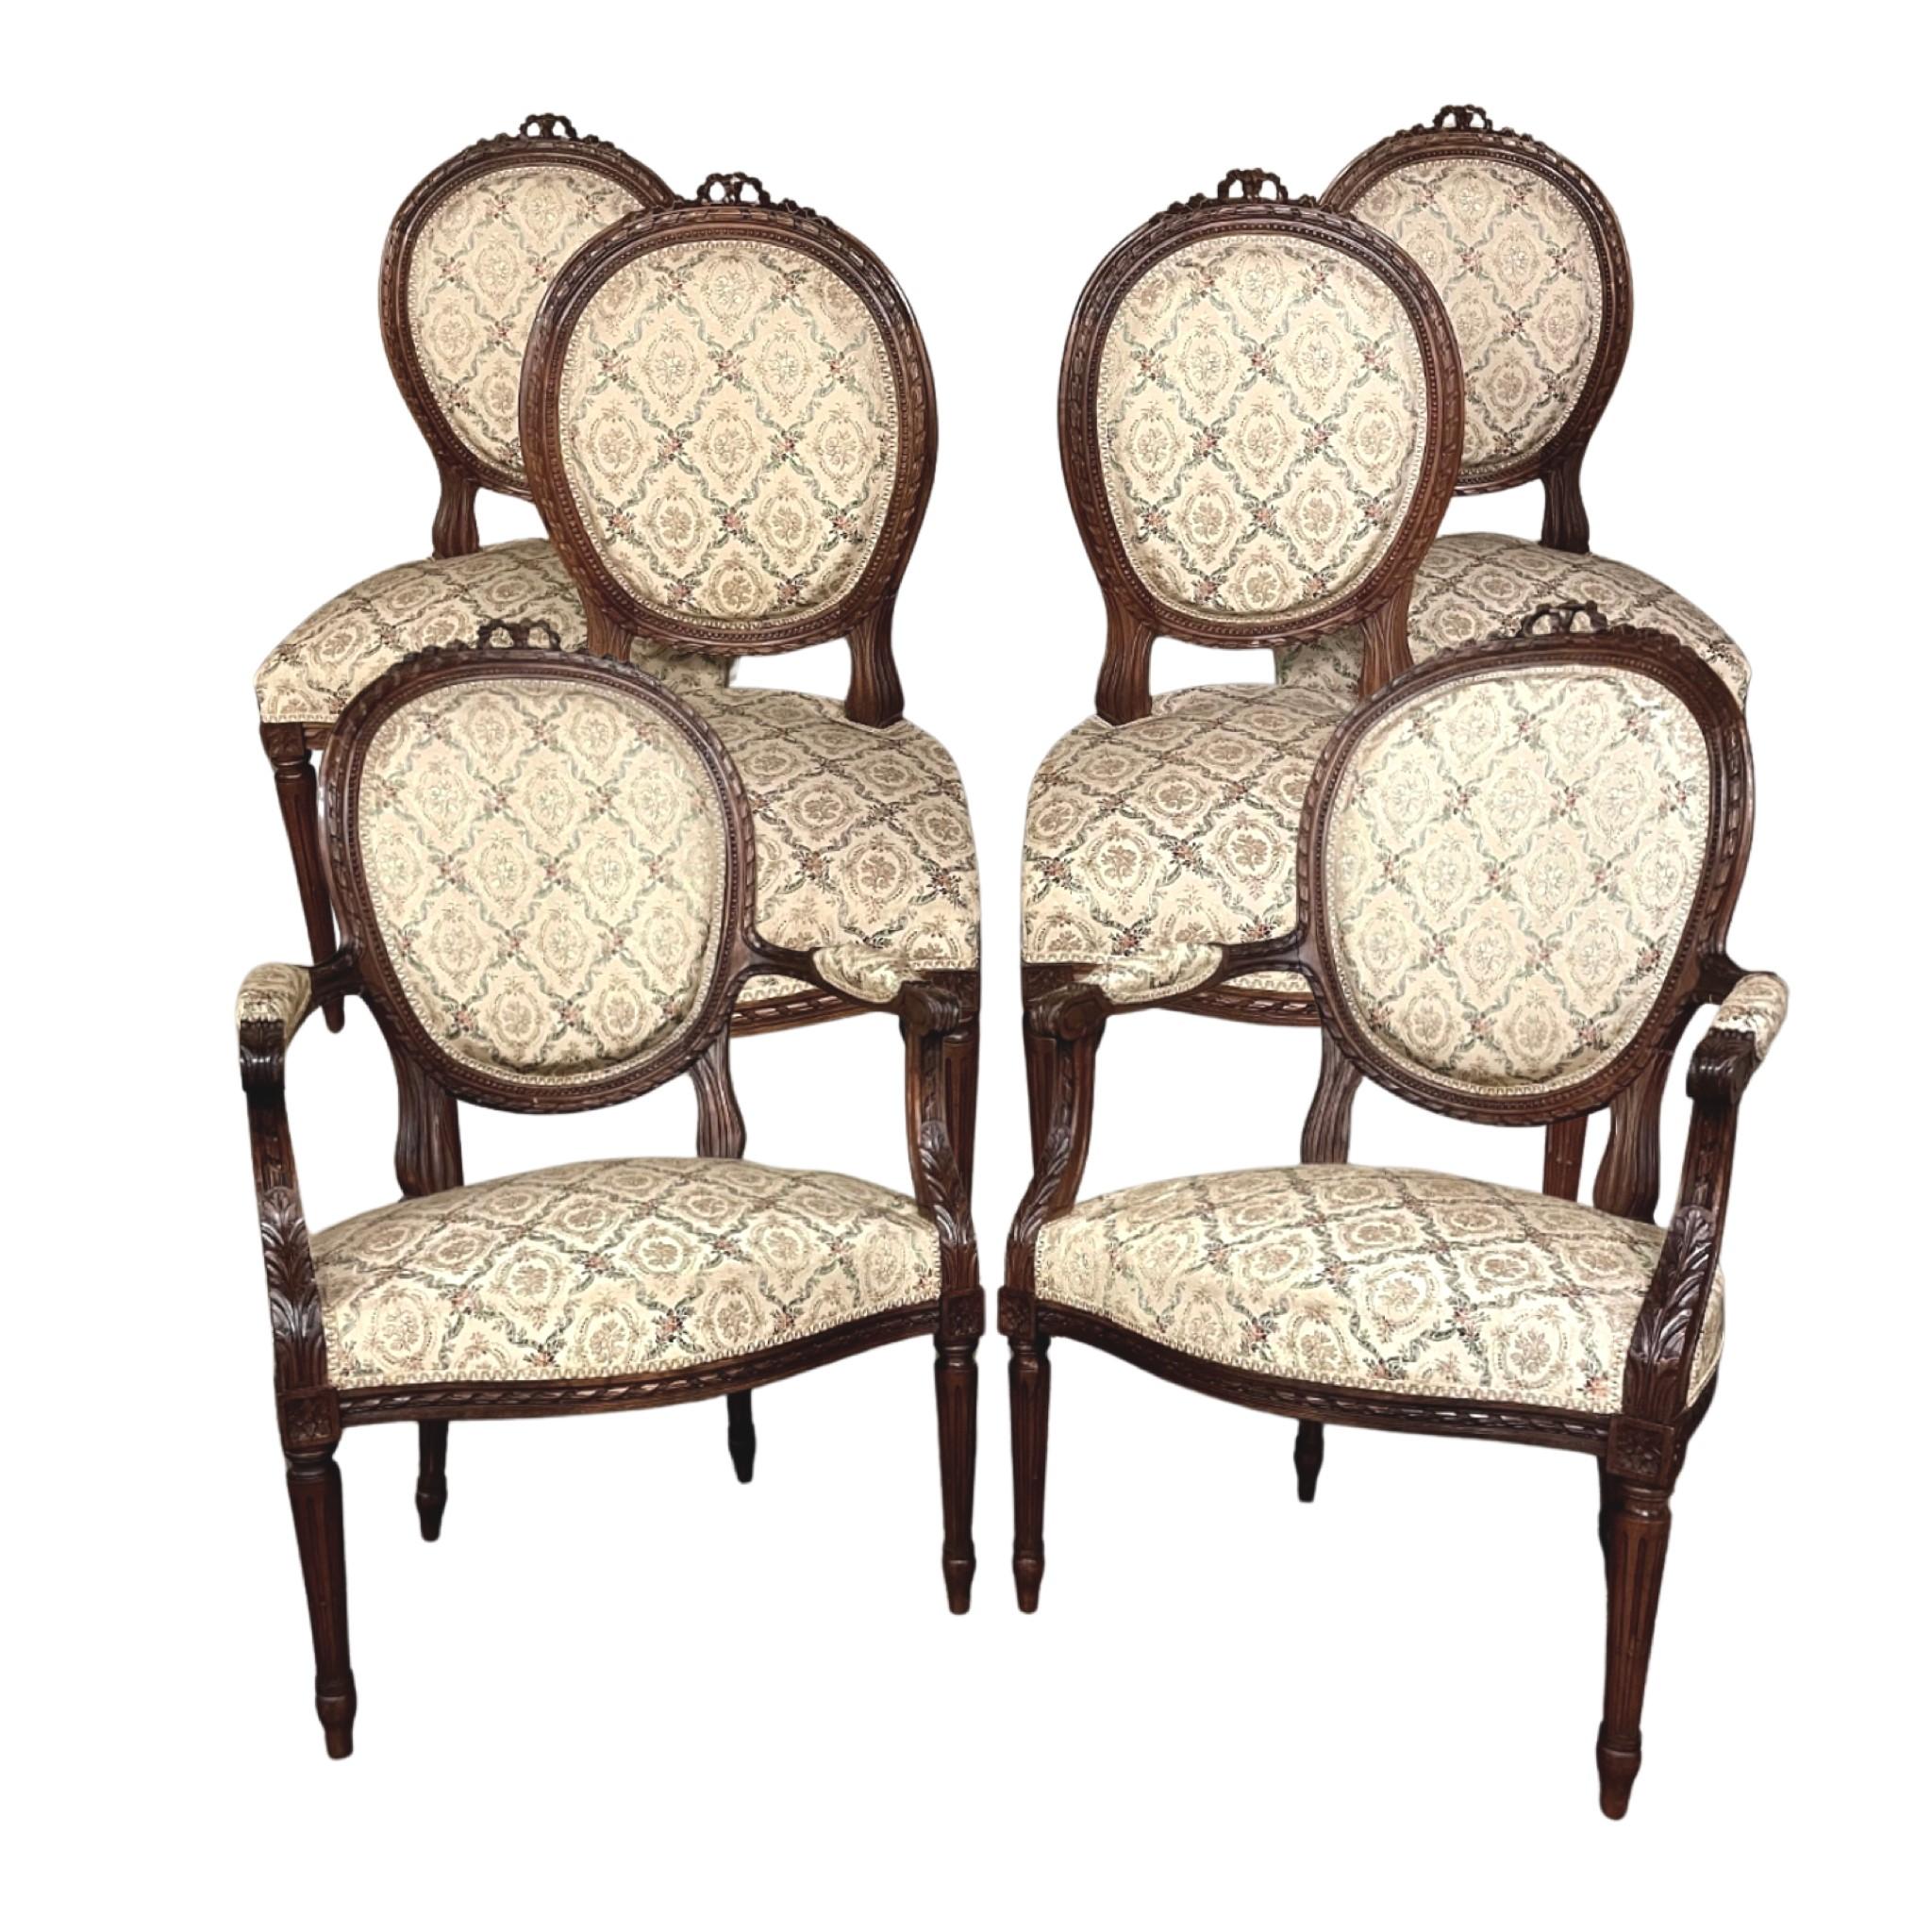 Pair 19th Century French Louis XVI walnut armchairs ~ fauteuils is truly a timeless classic! Featuring curved oval seatbacks and generous seats, the pair offers surprising comfort, and the very high quality of the upholstery ensures decades of